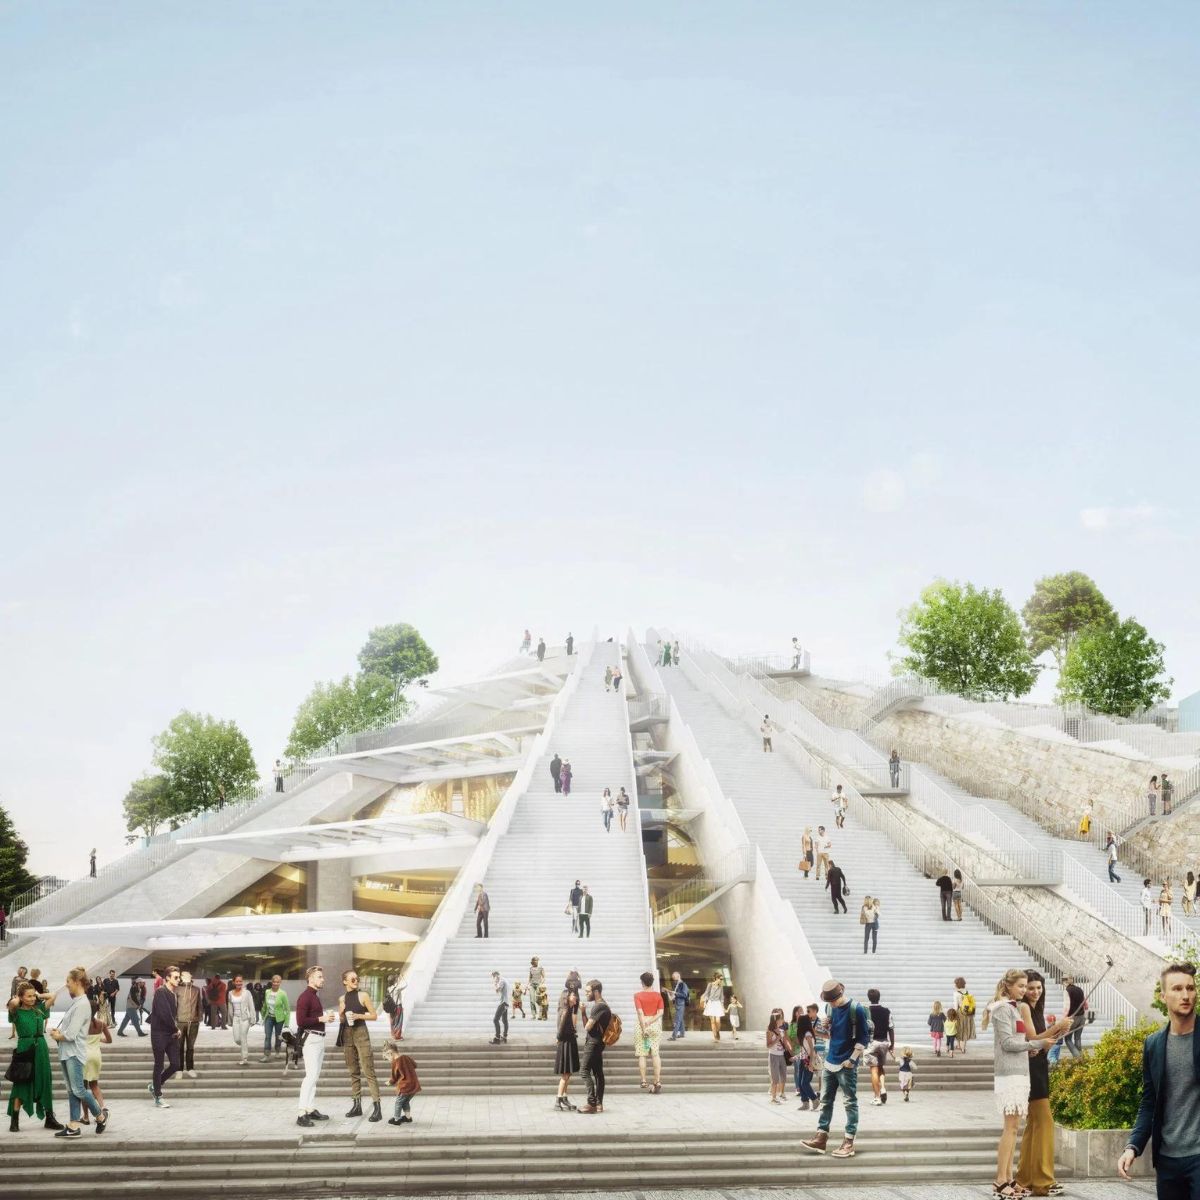 Pyramid of Tirana one of top ten architectural projects